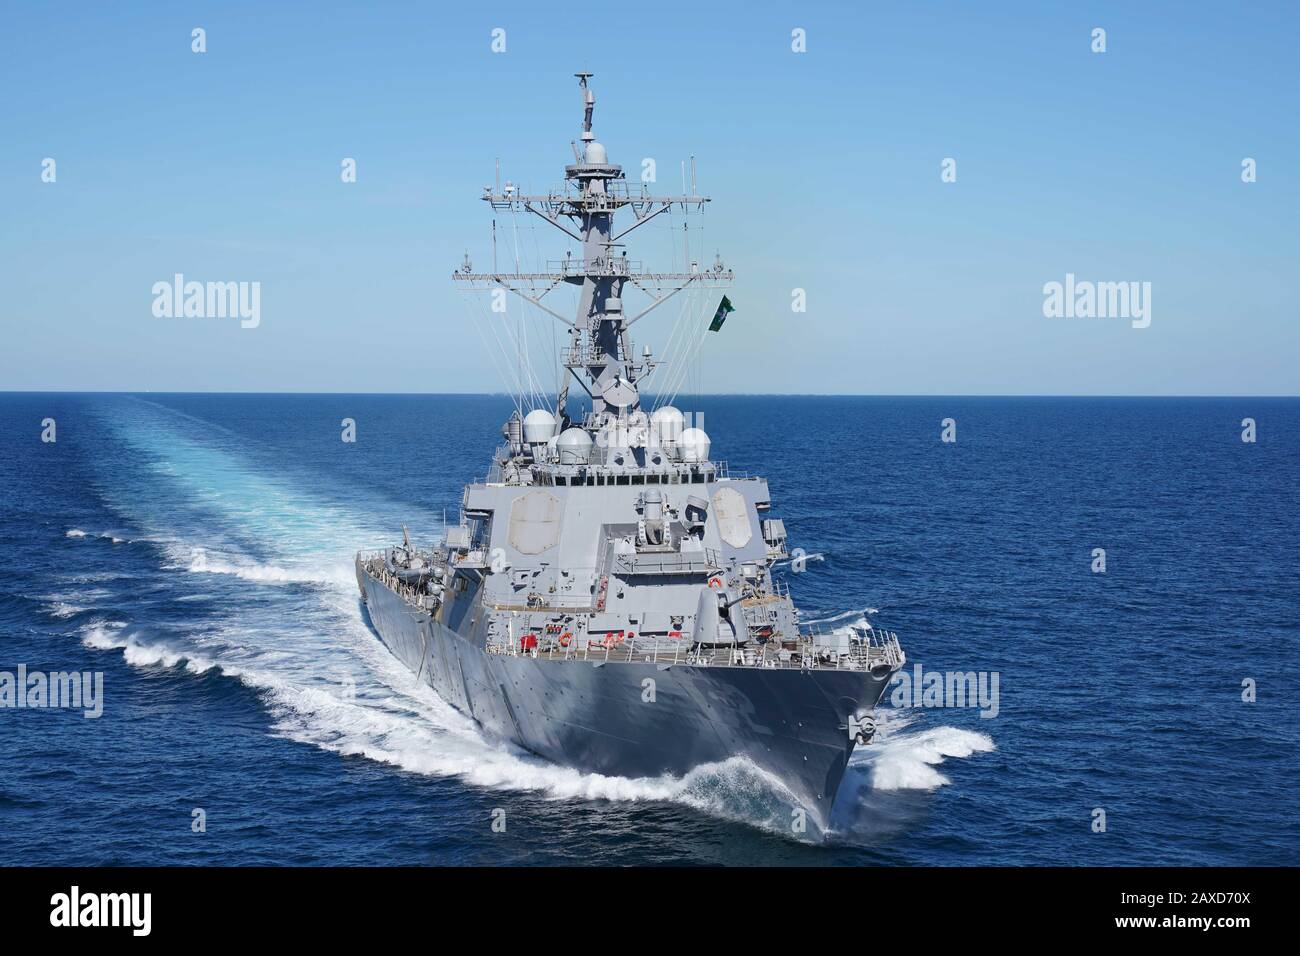 The U.S. Navy Arleigh Burke-class guided-missile destroyer USS Fitzgerald conducts sea trials in the Gulf of Mexico February 3, 2020 off the coast of Pascagoula, Mississippi, USA. The ship was severely damaged in a collision with a container ship and spent two years being repaired and upgraded. Stock Photo